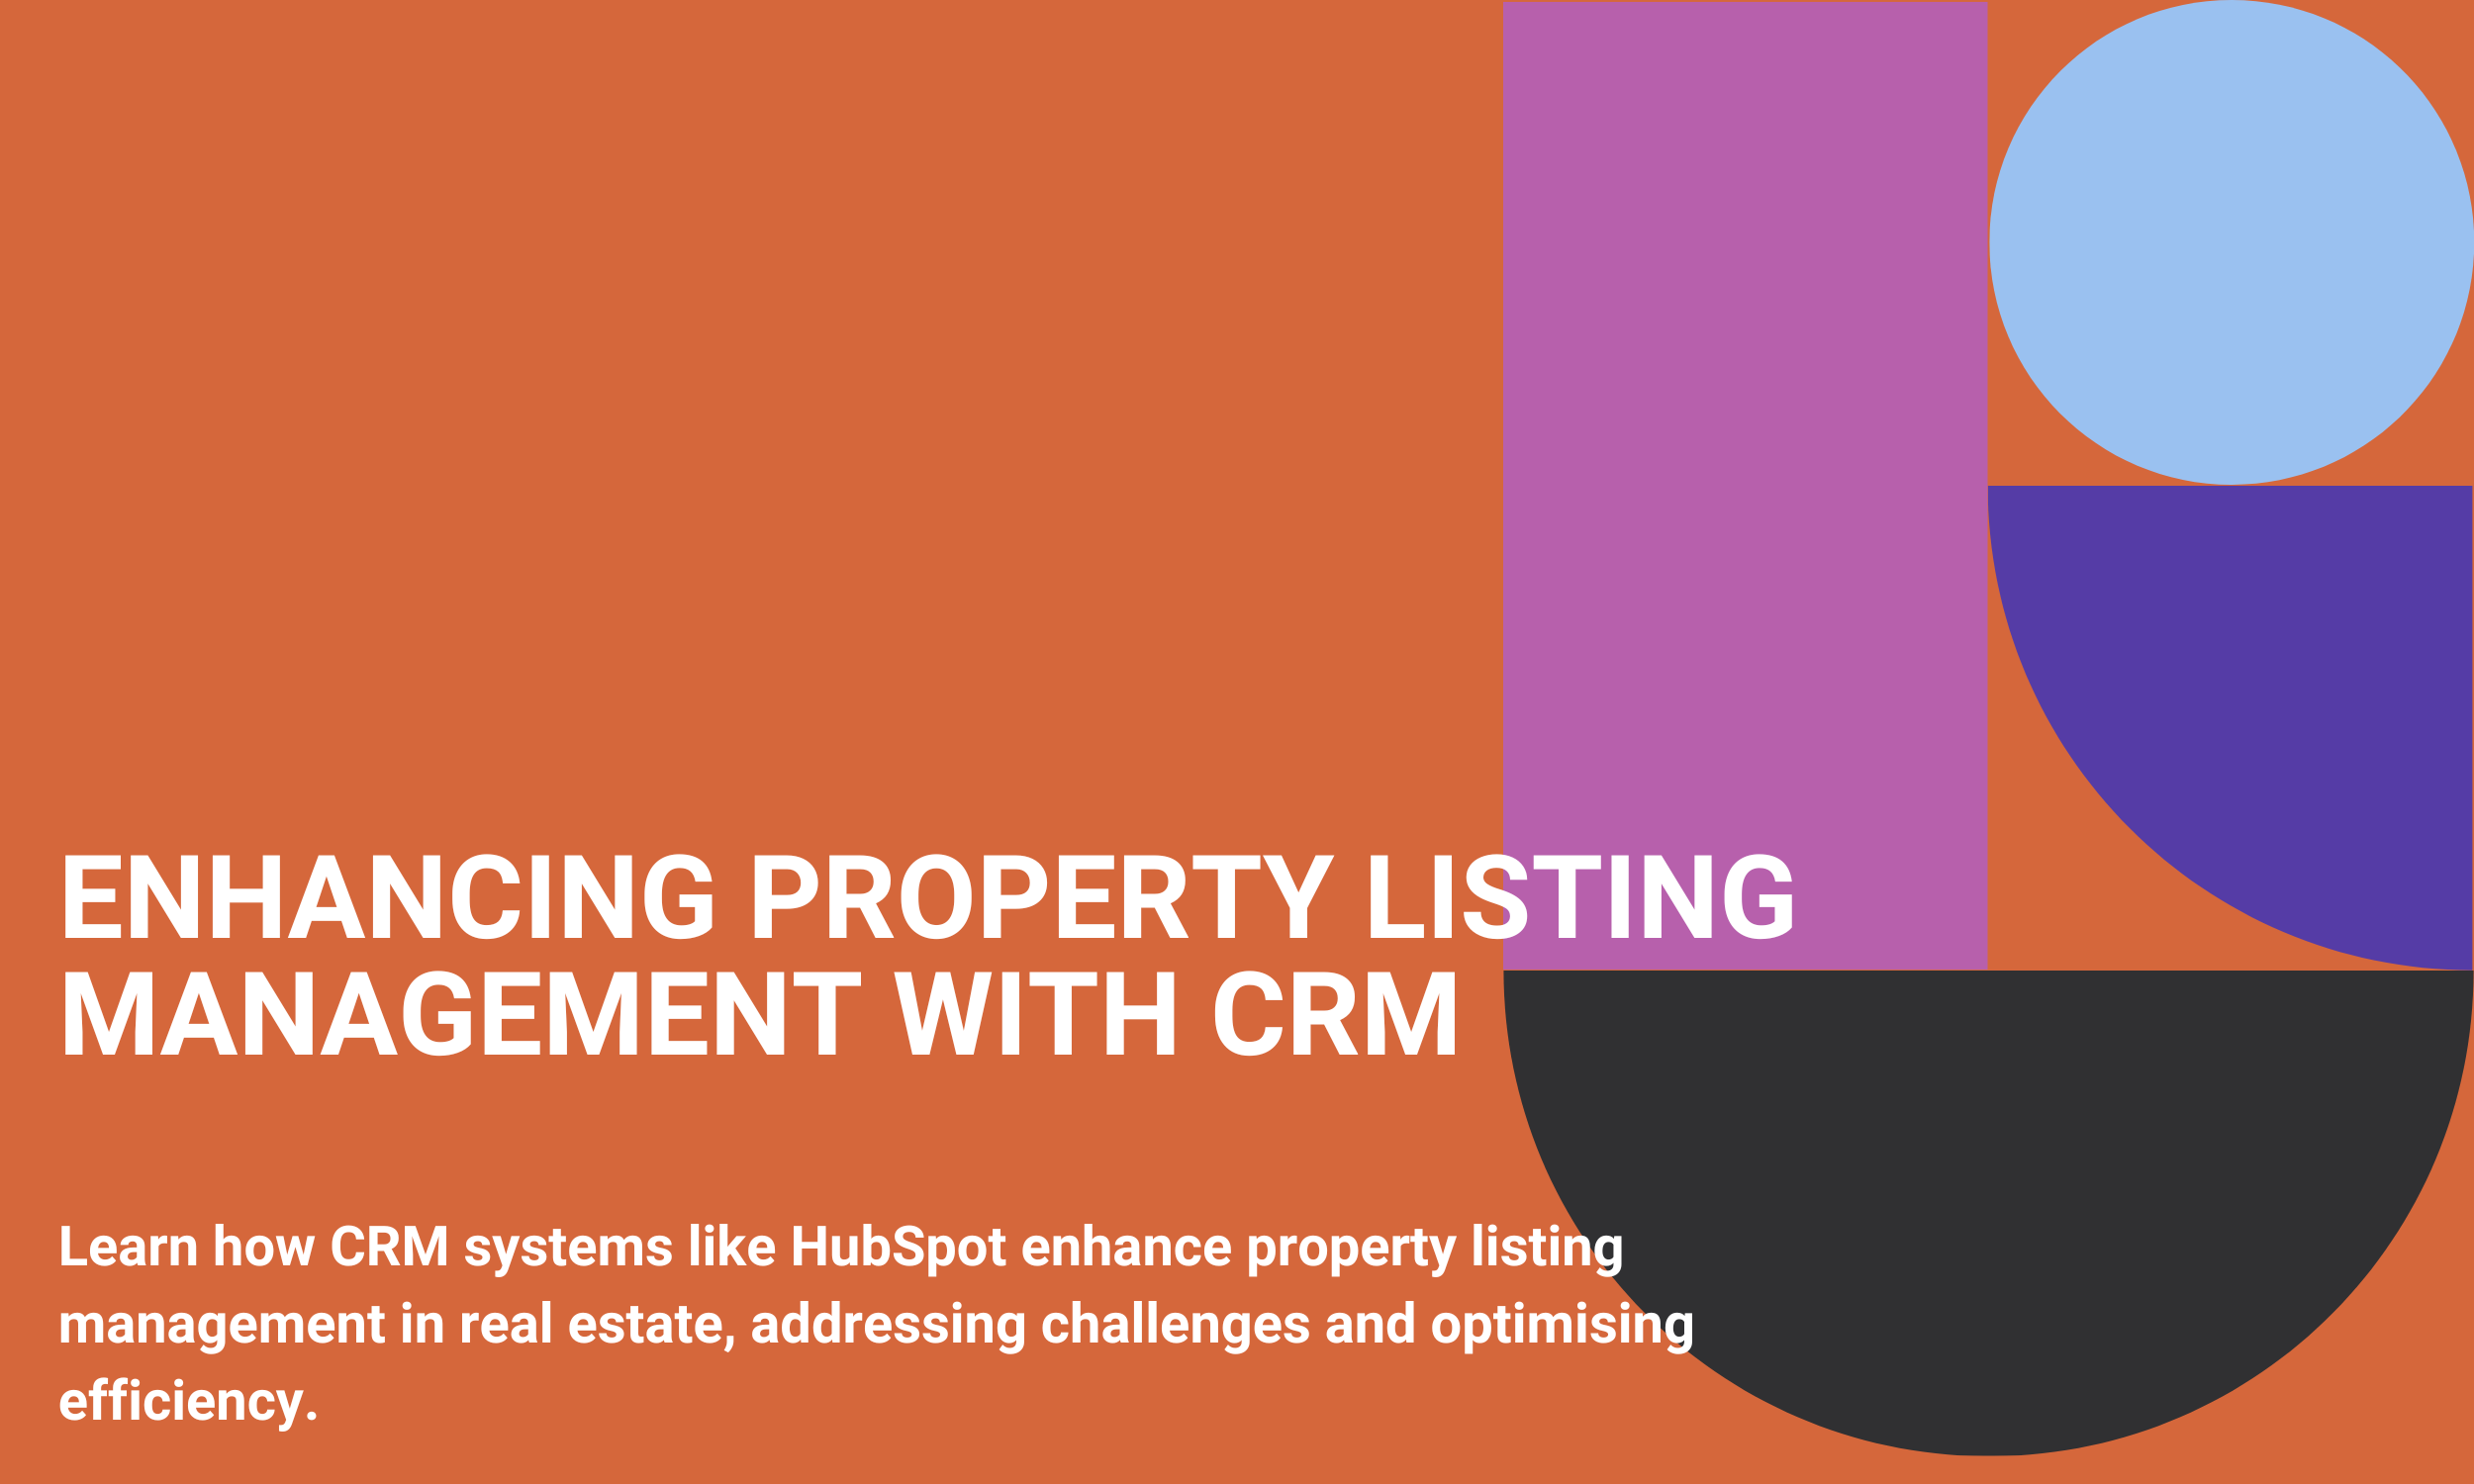 Enhancing Property Listing Management With CRM